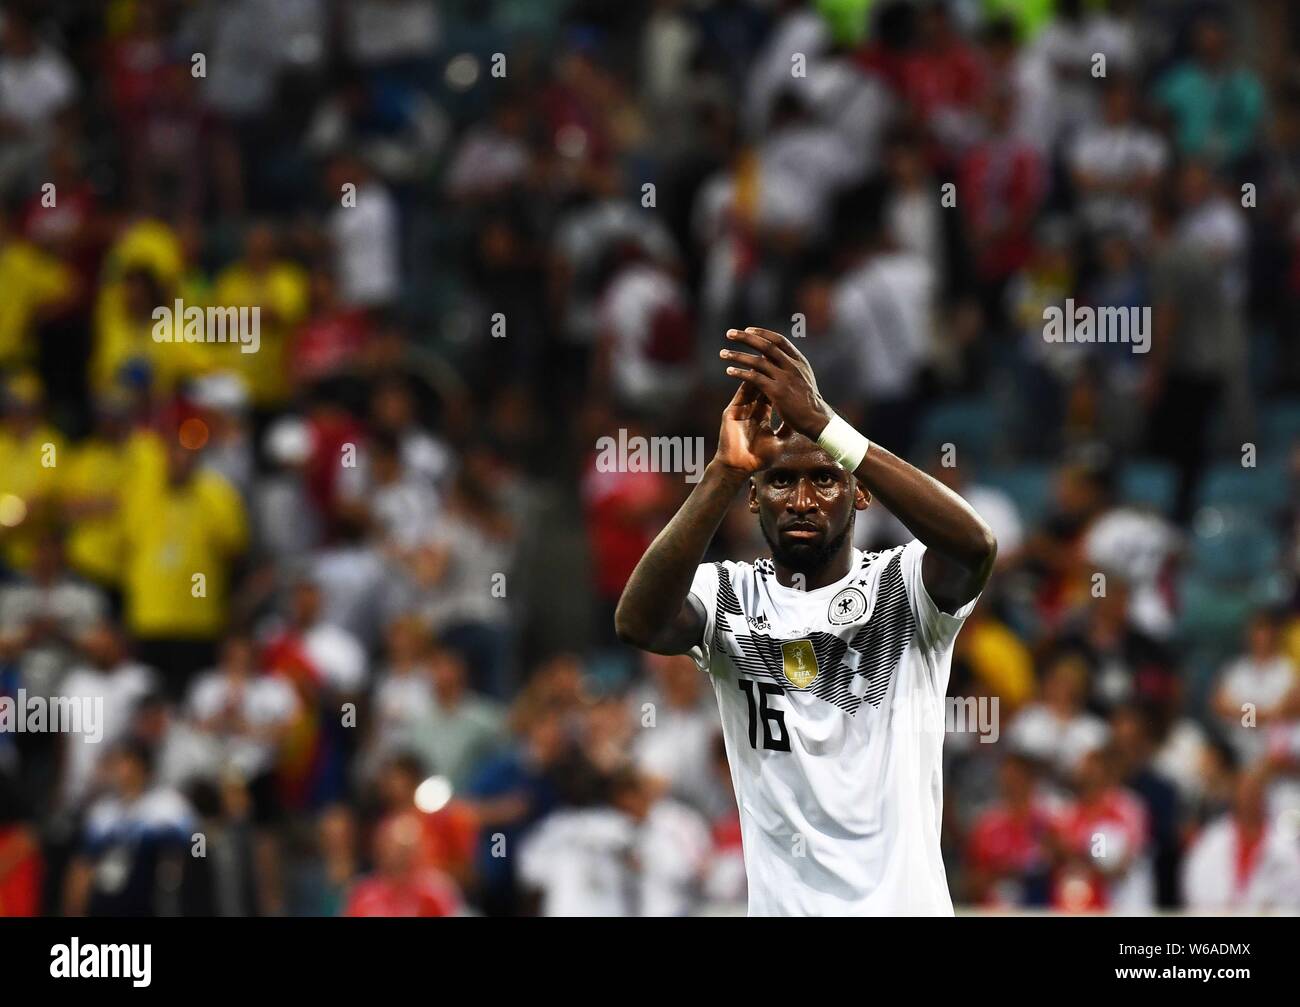 Antonio Ruediger of Germany celebrates after scoring a goal against Sweden in their Group F match during the FIFA World Cup 2018 in Sochi, Russia, 23 Stock Photo